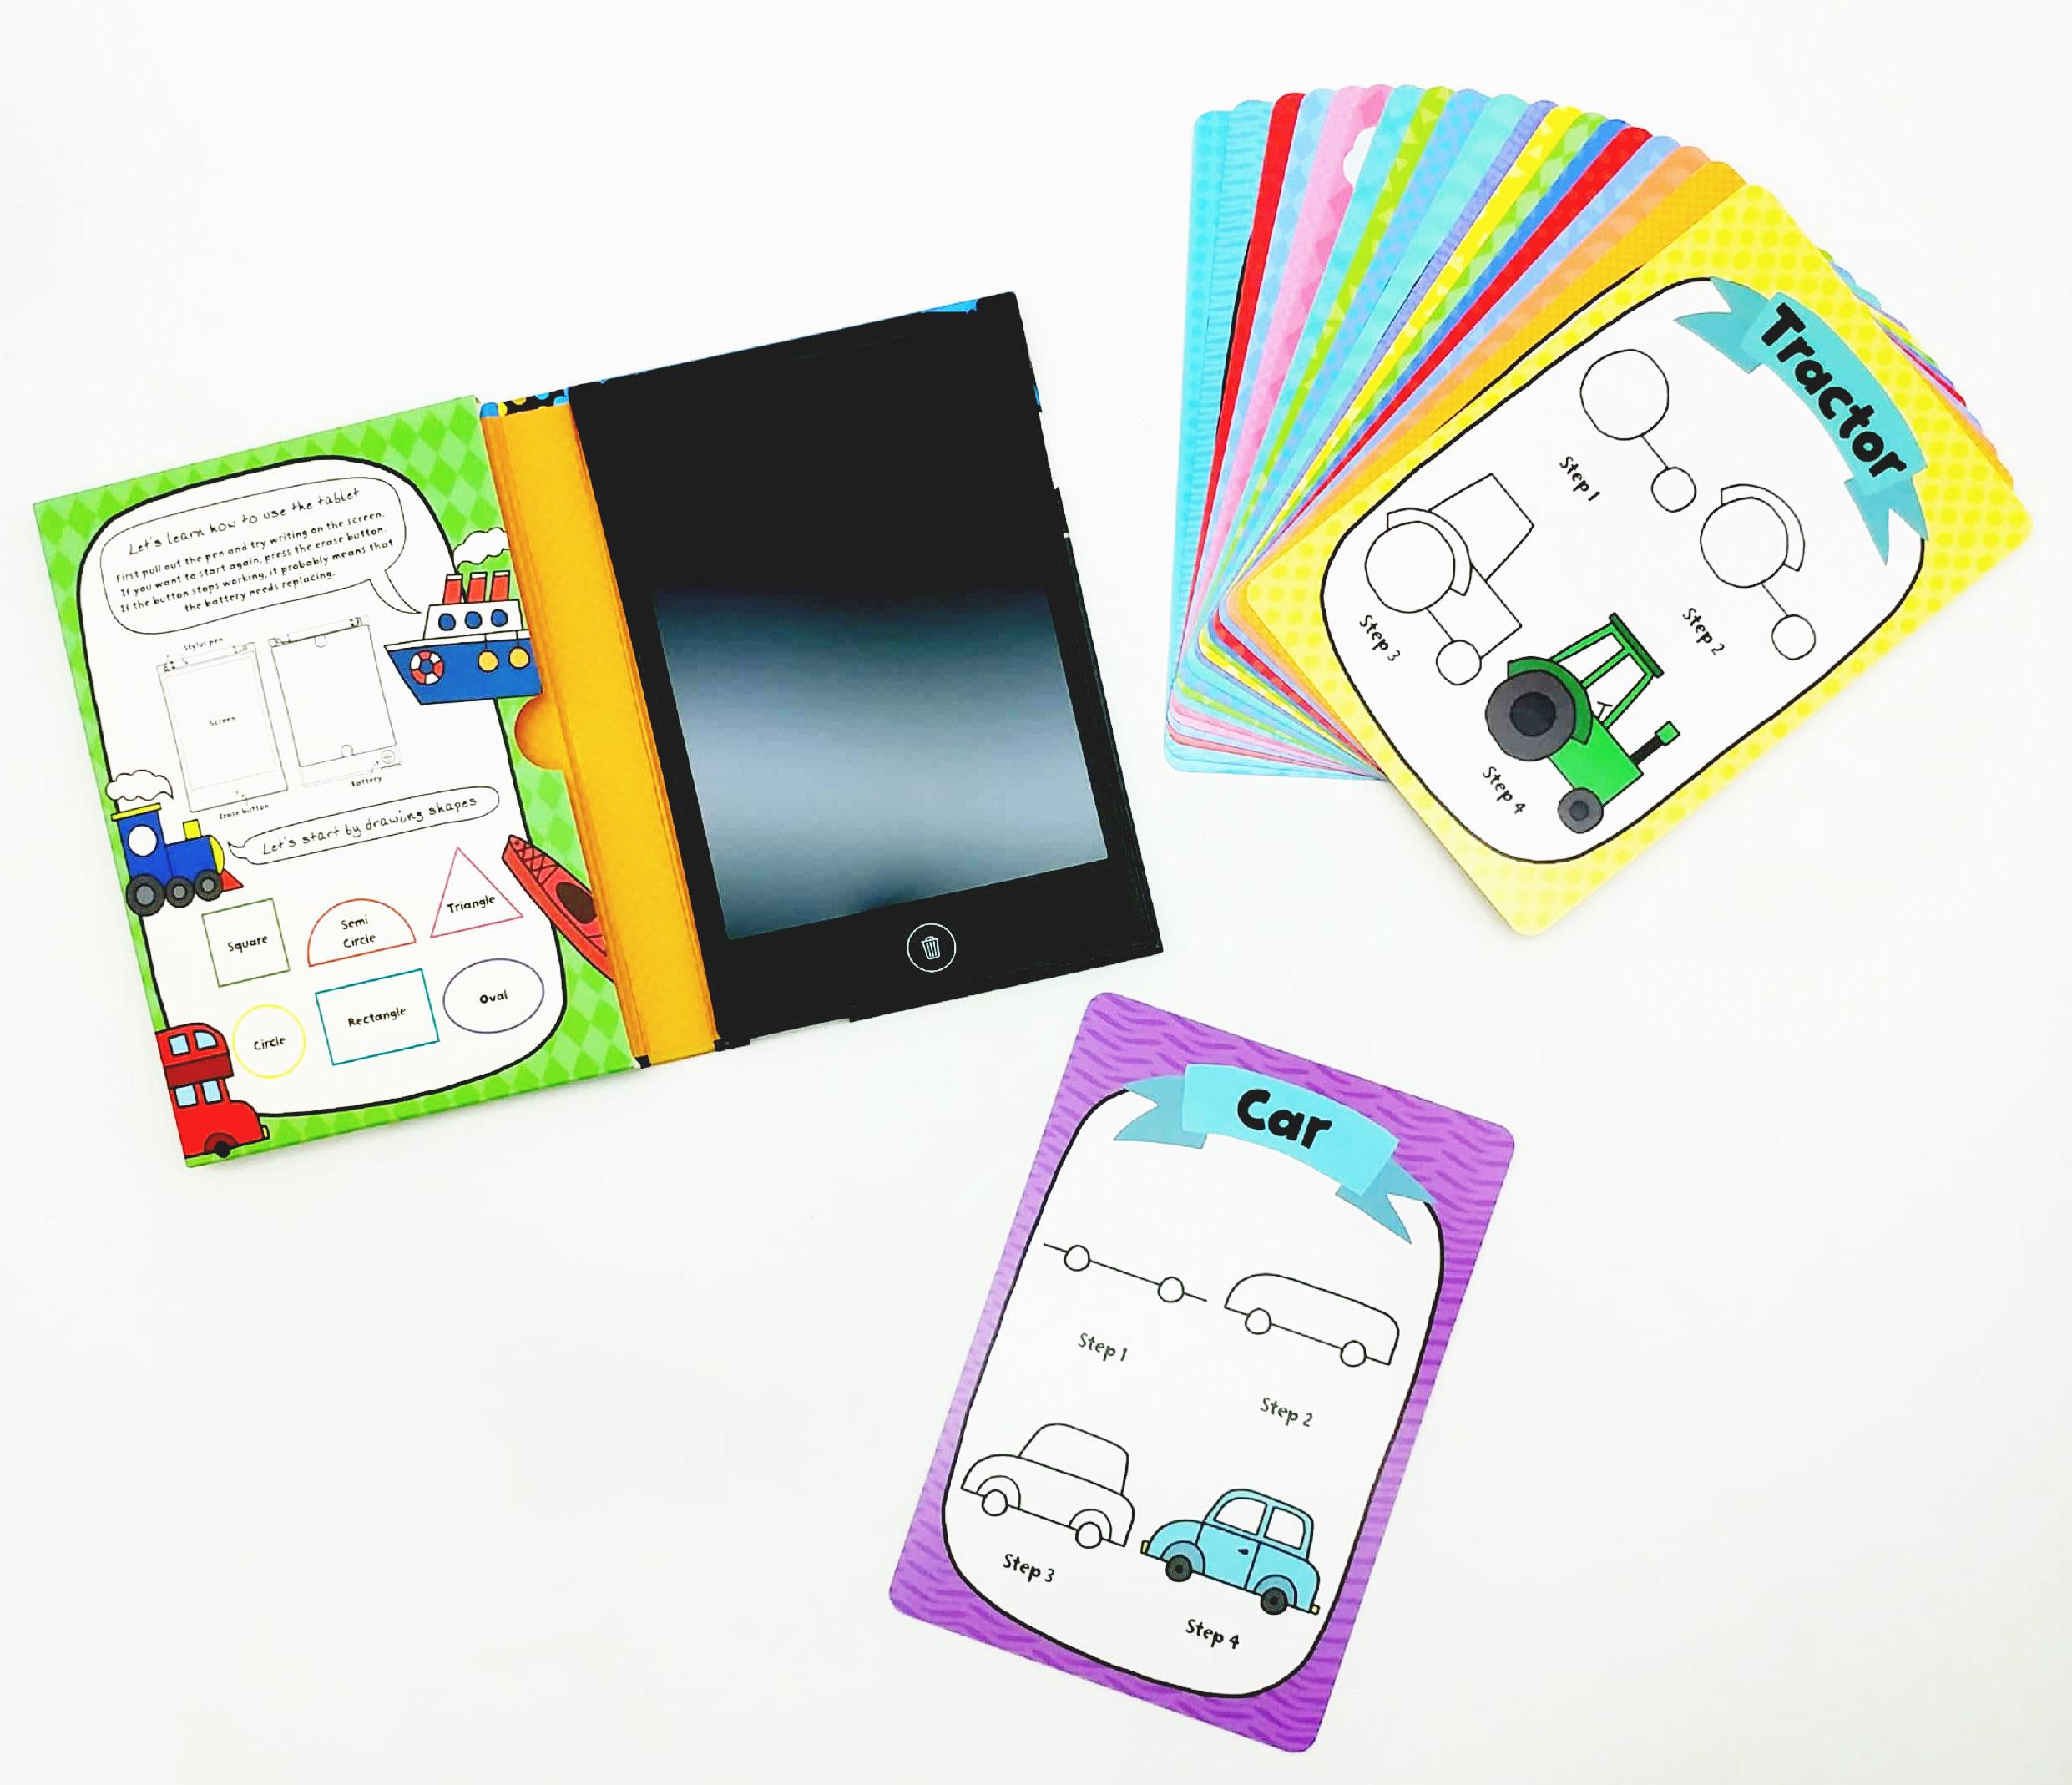 LCD Tablet &amp; Flashcards - Things That Go